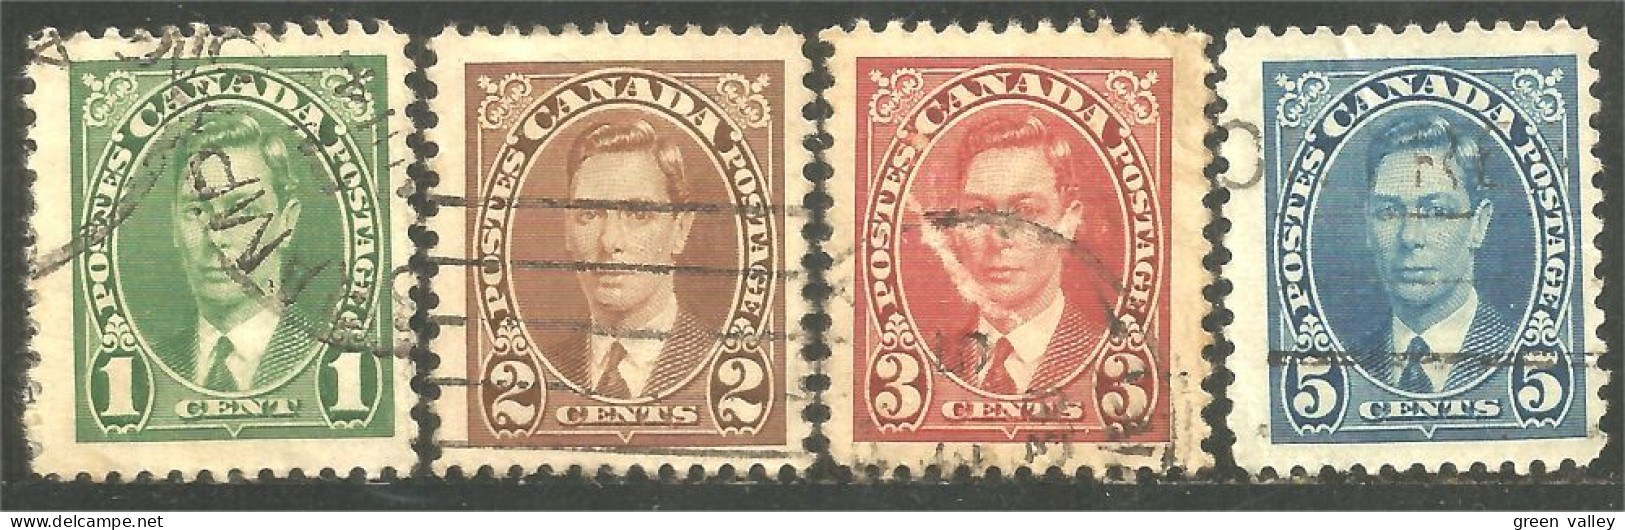 951 Canada 1937 King Roi George VI Mufti Issue 4 Timbres Stamps (484b) - Usados